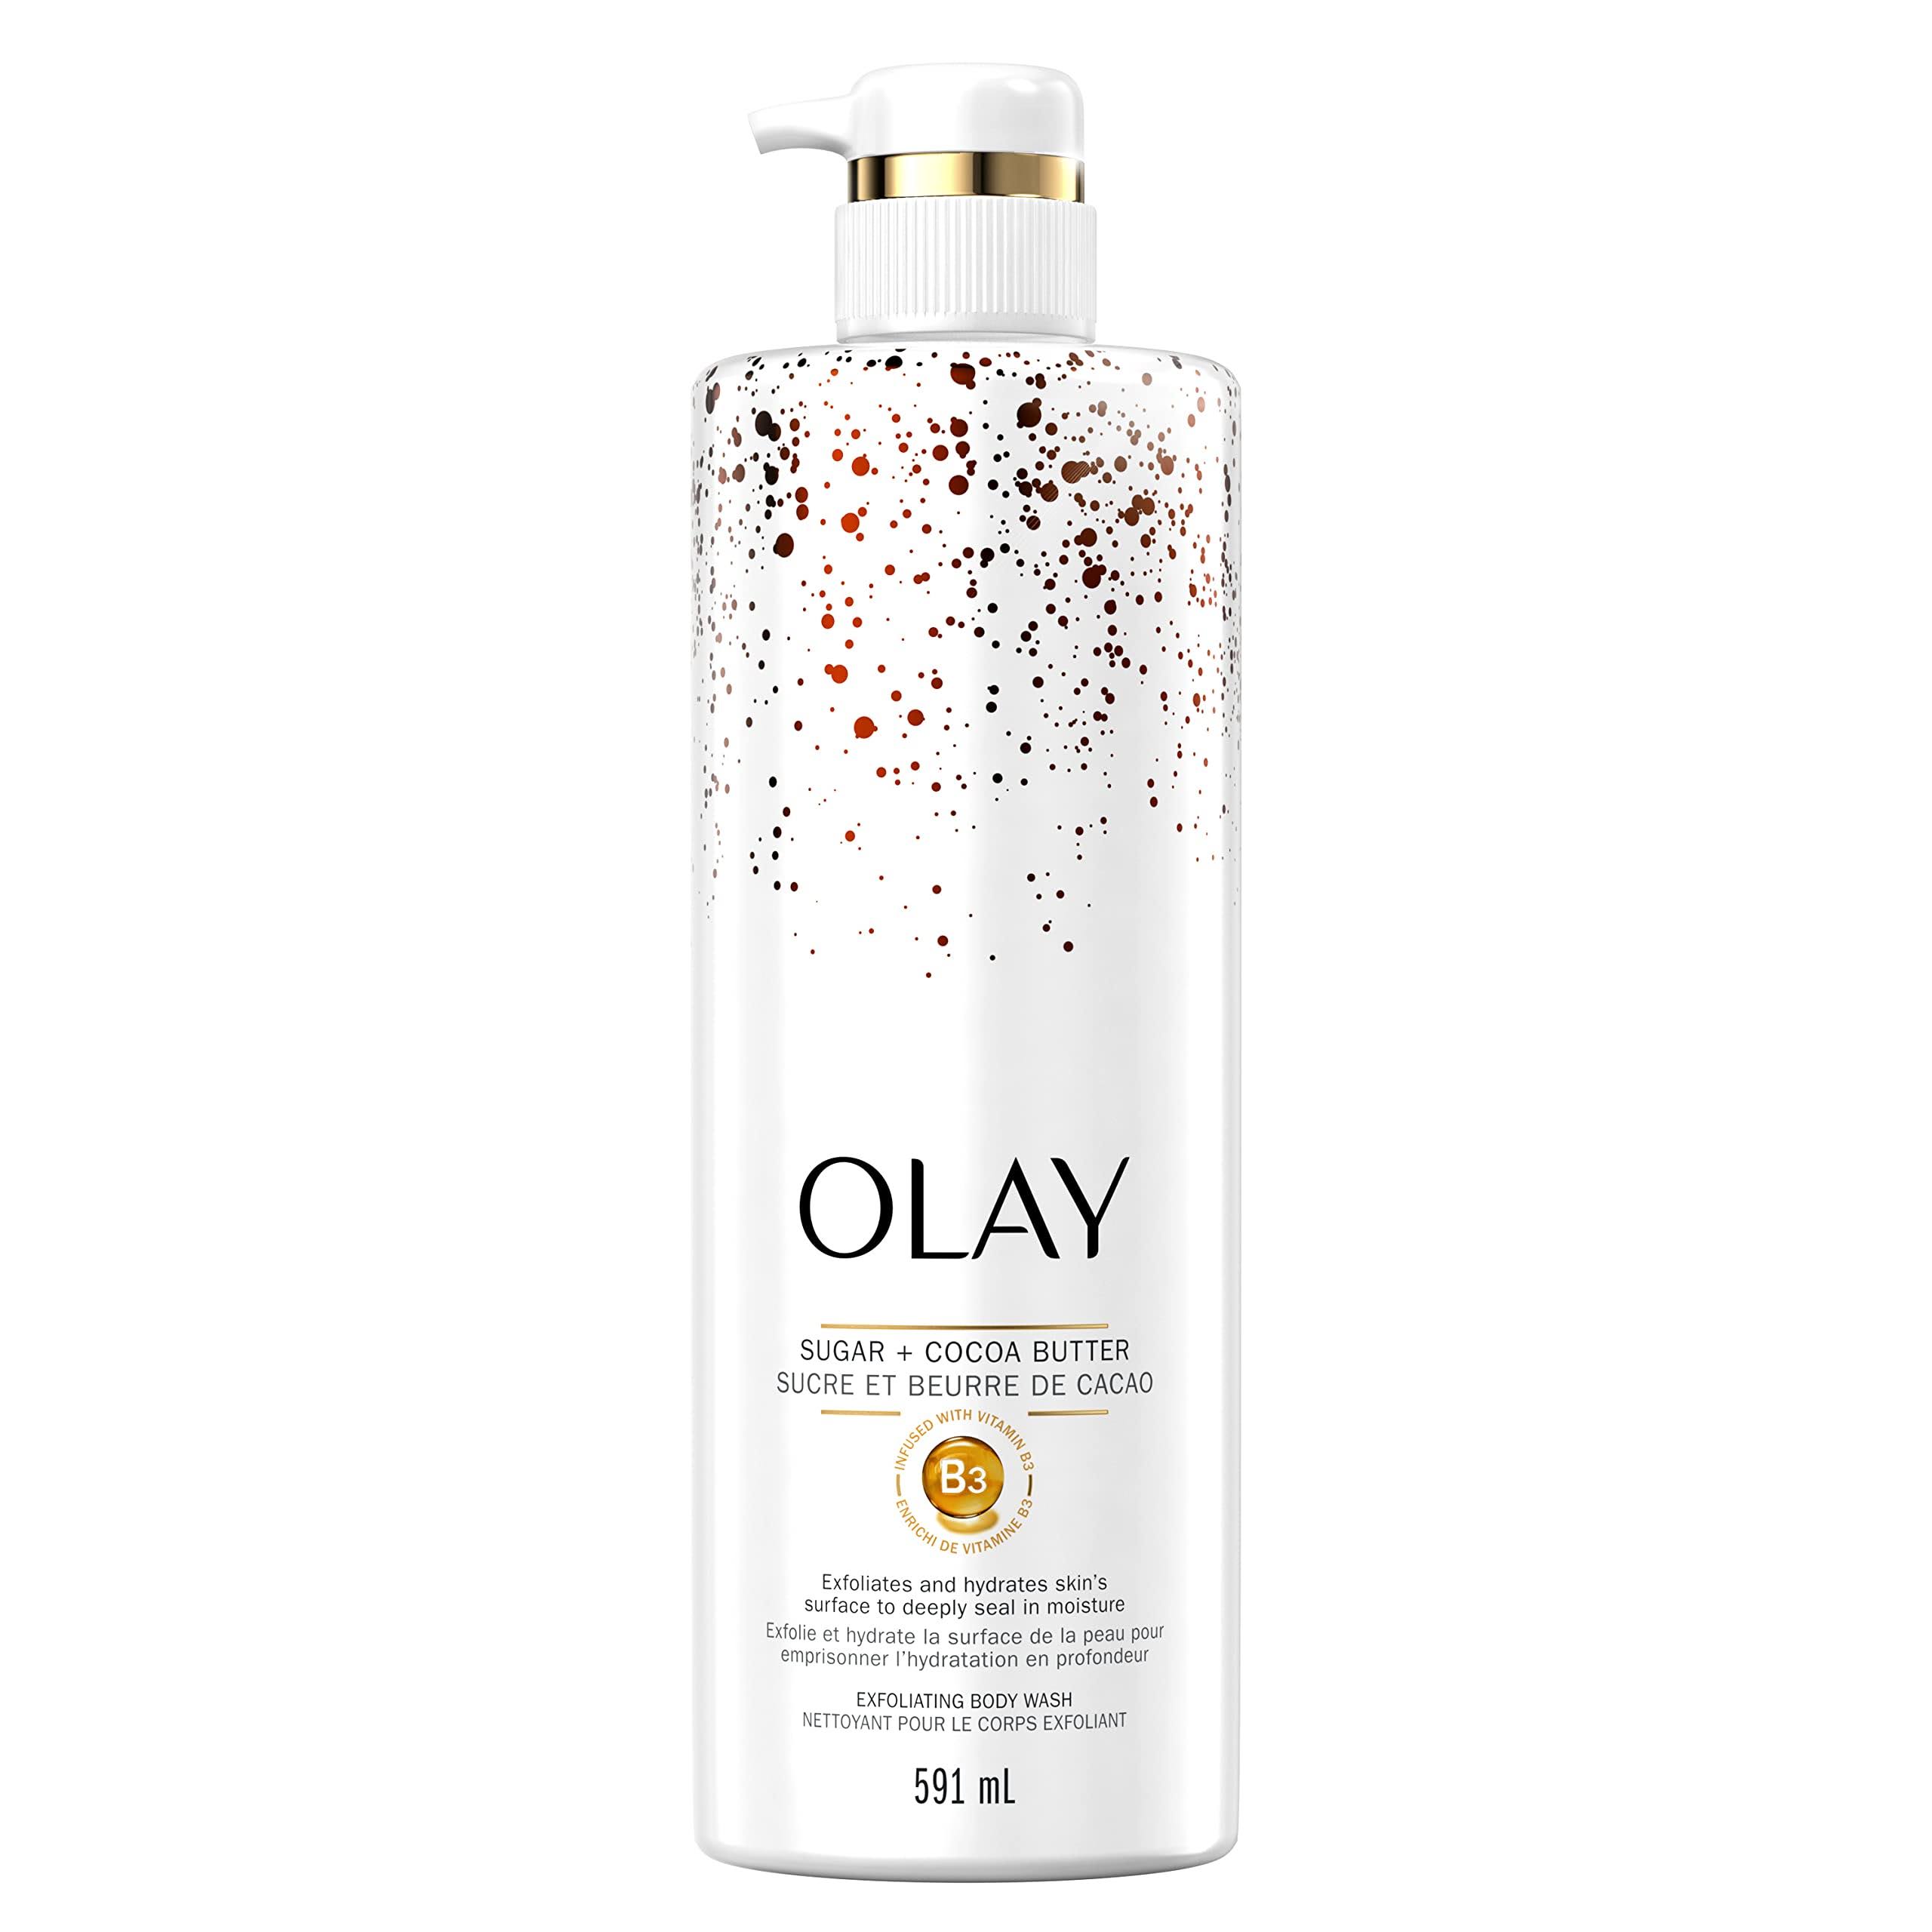 Olay Exfoliating & Moisturizing Body Wash with Sugar, Cocoa Butter, and B3, 591mL